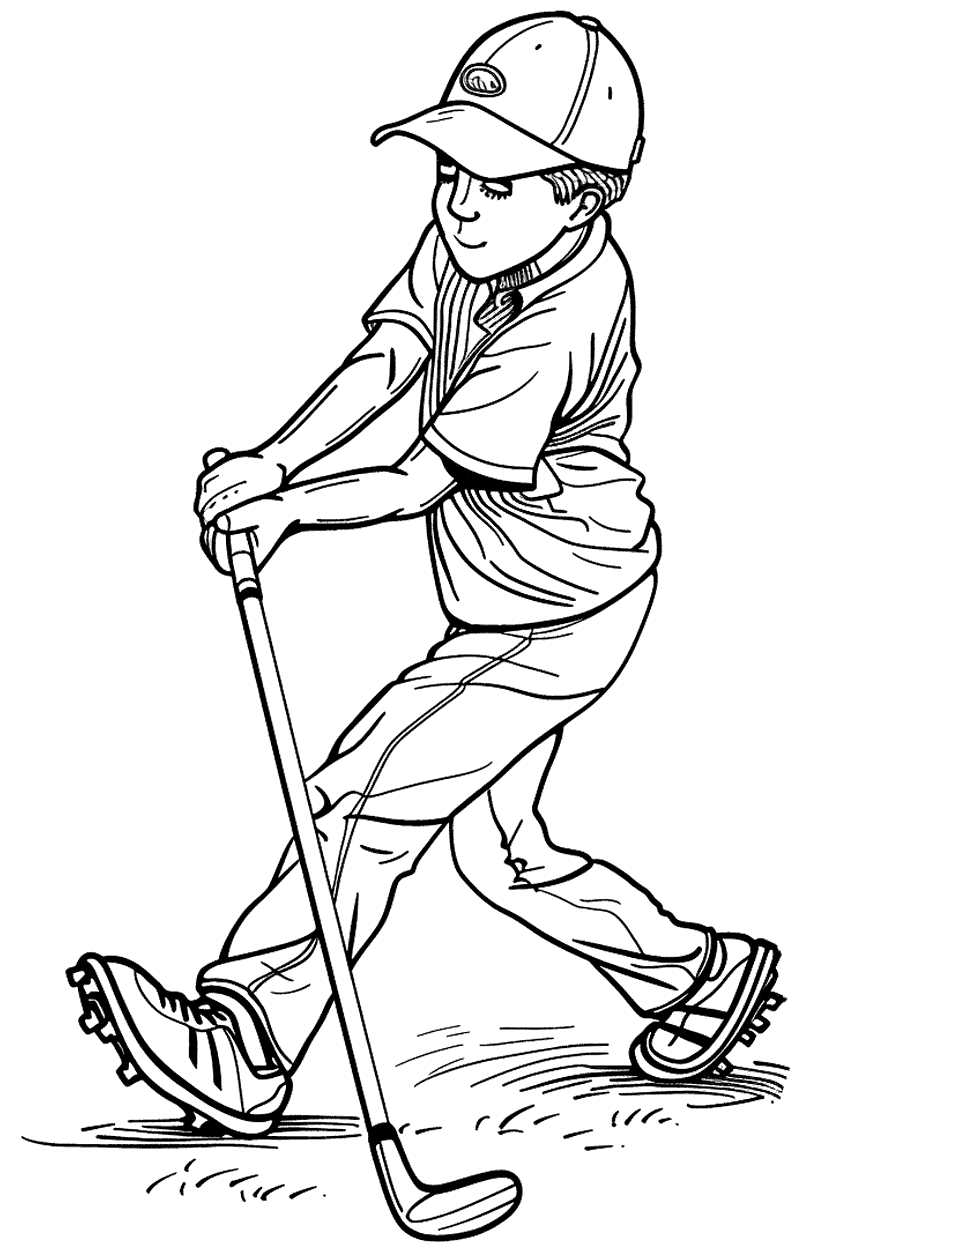 Golf Swing Sports Coloring Page - A golfer swinging a club, practicing golf play.